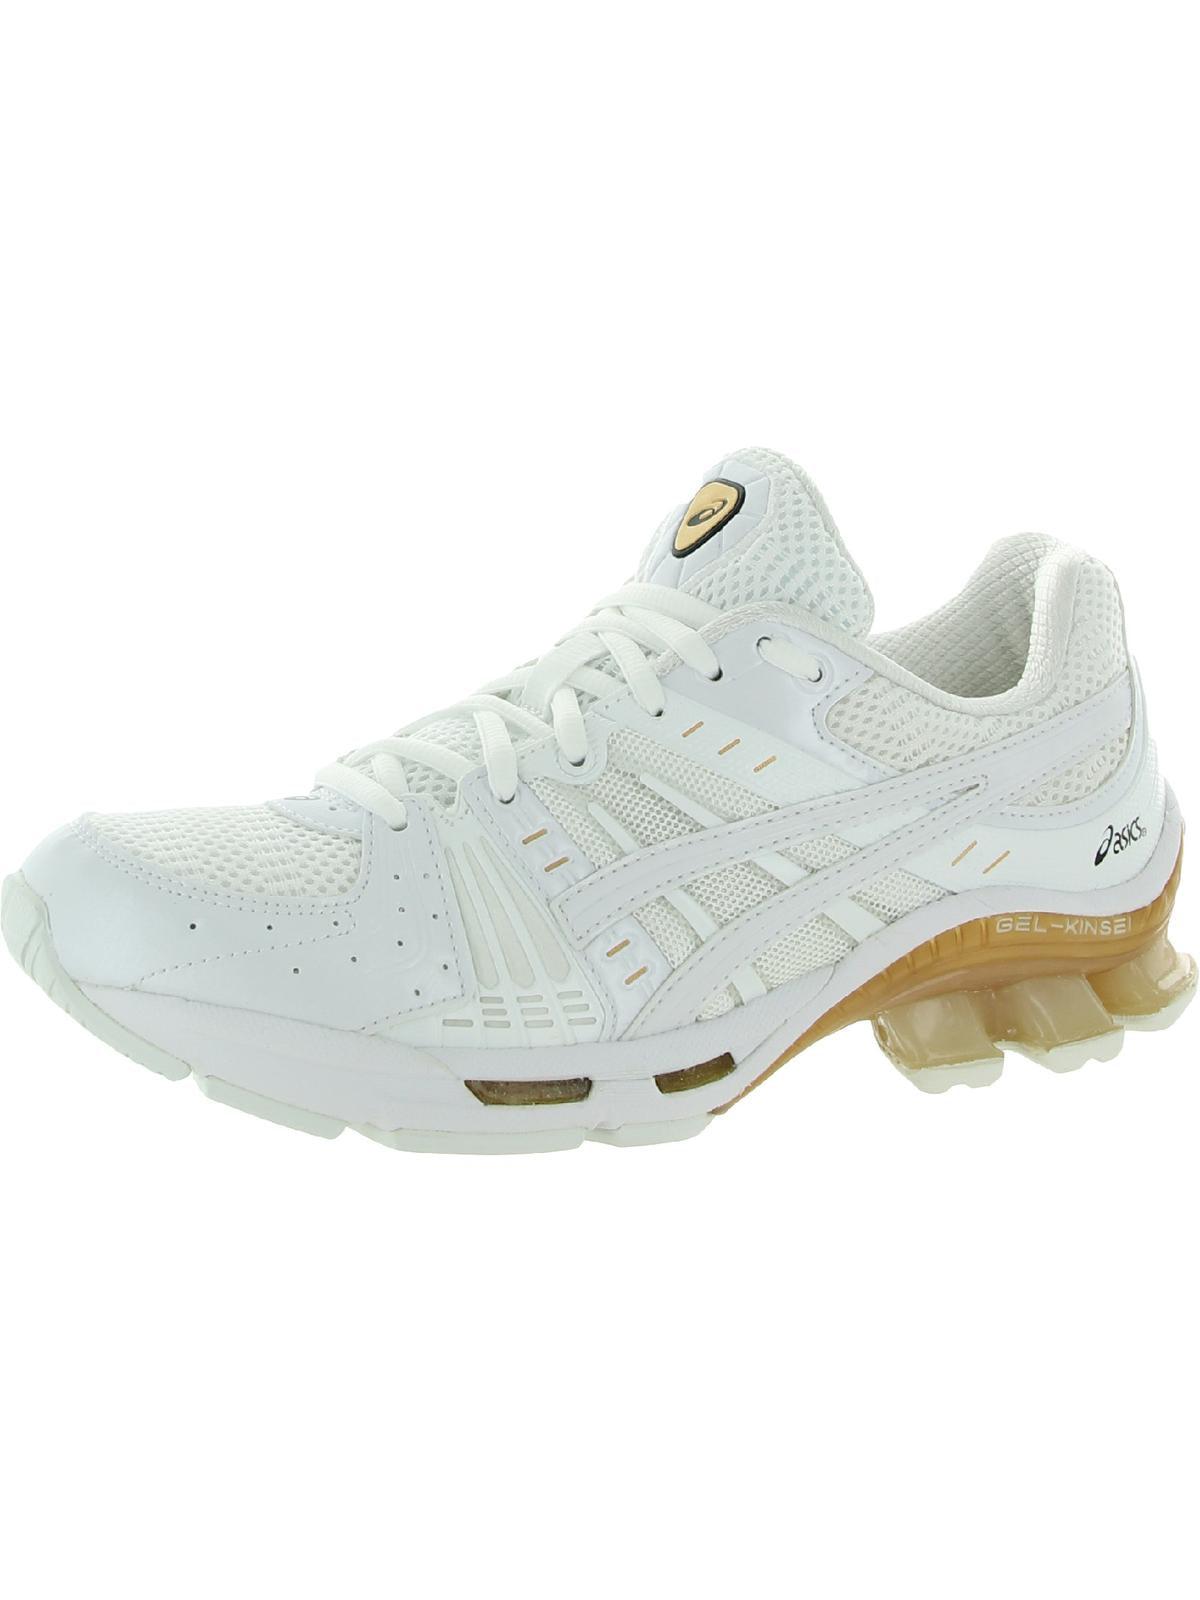 Asics Gel-kinsei Og Leather Fitness Athletic Shoes in | Lyst